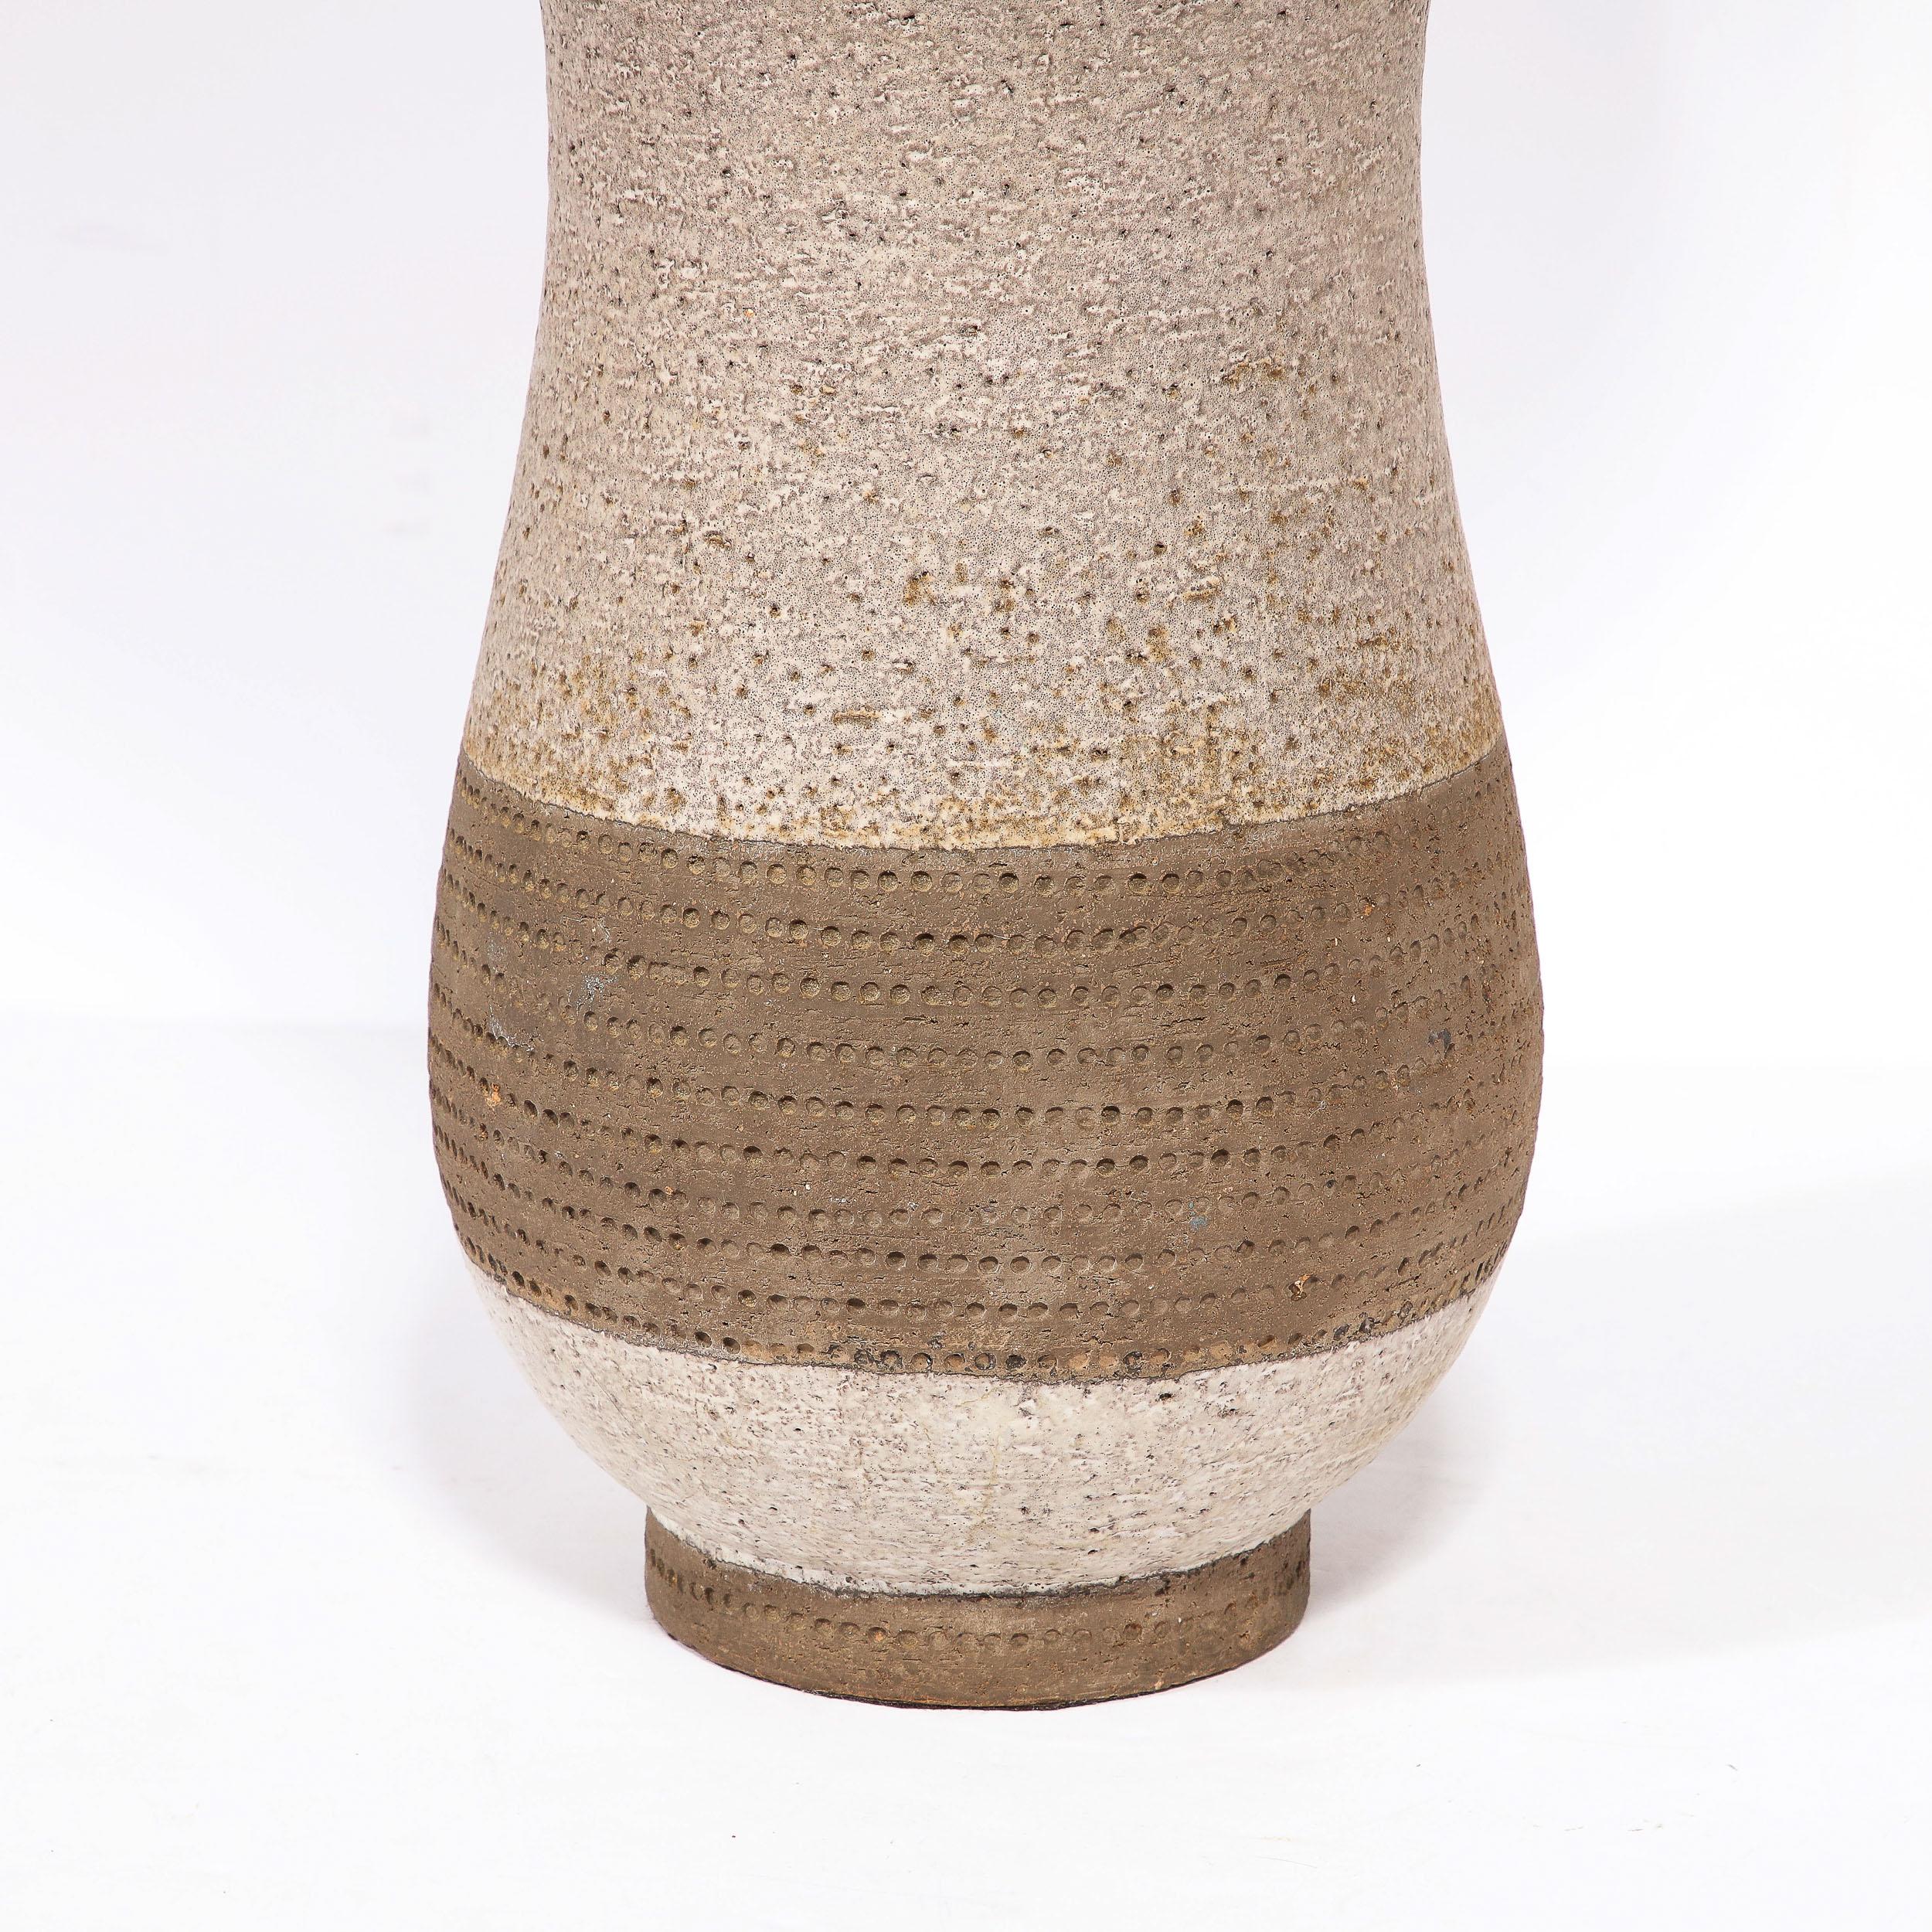 American Mid-Century Modern Ceramic Table Lamp w/ Arcade Detailing and Raw Fiber Shade For Sale